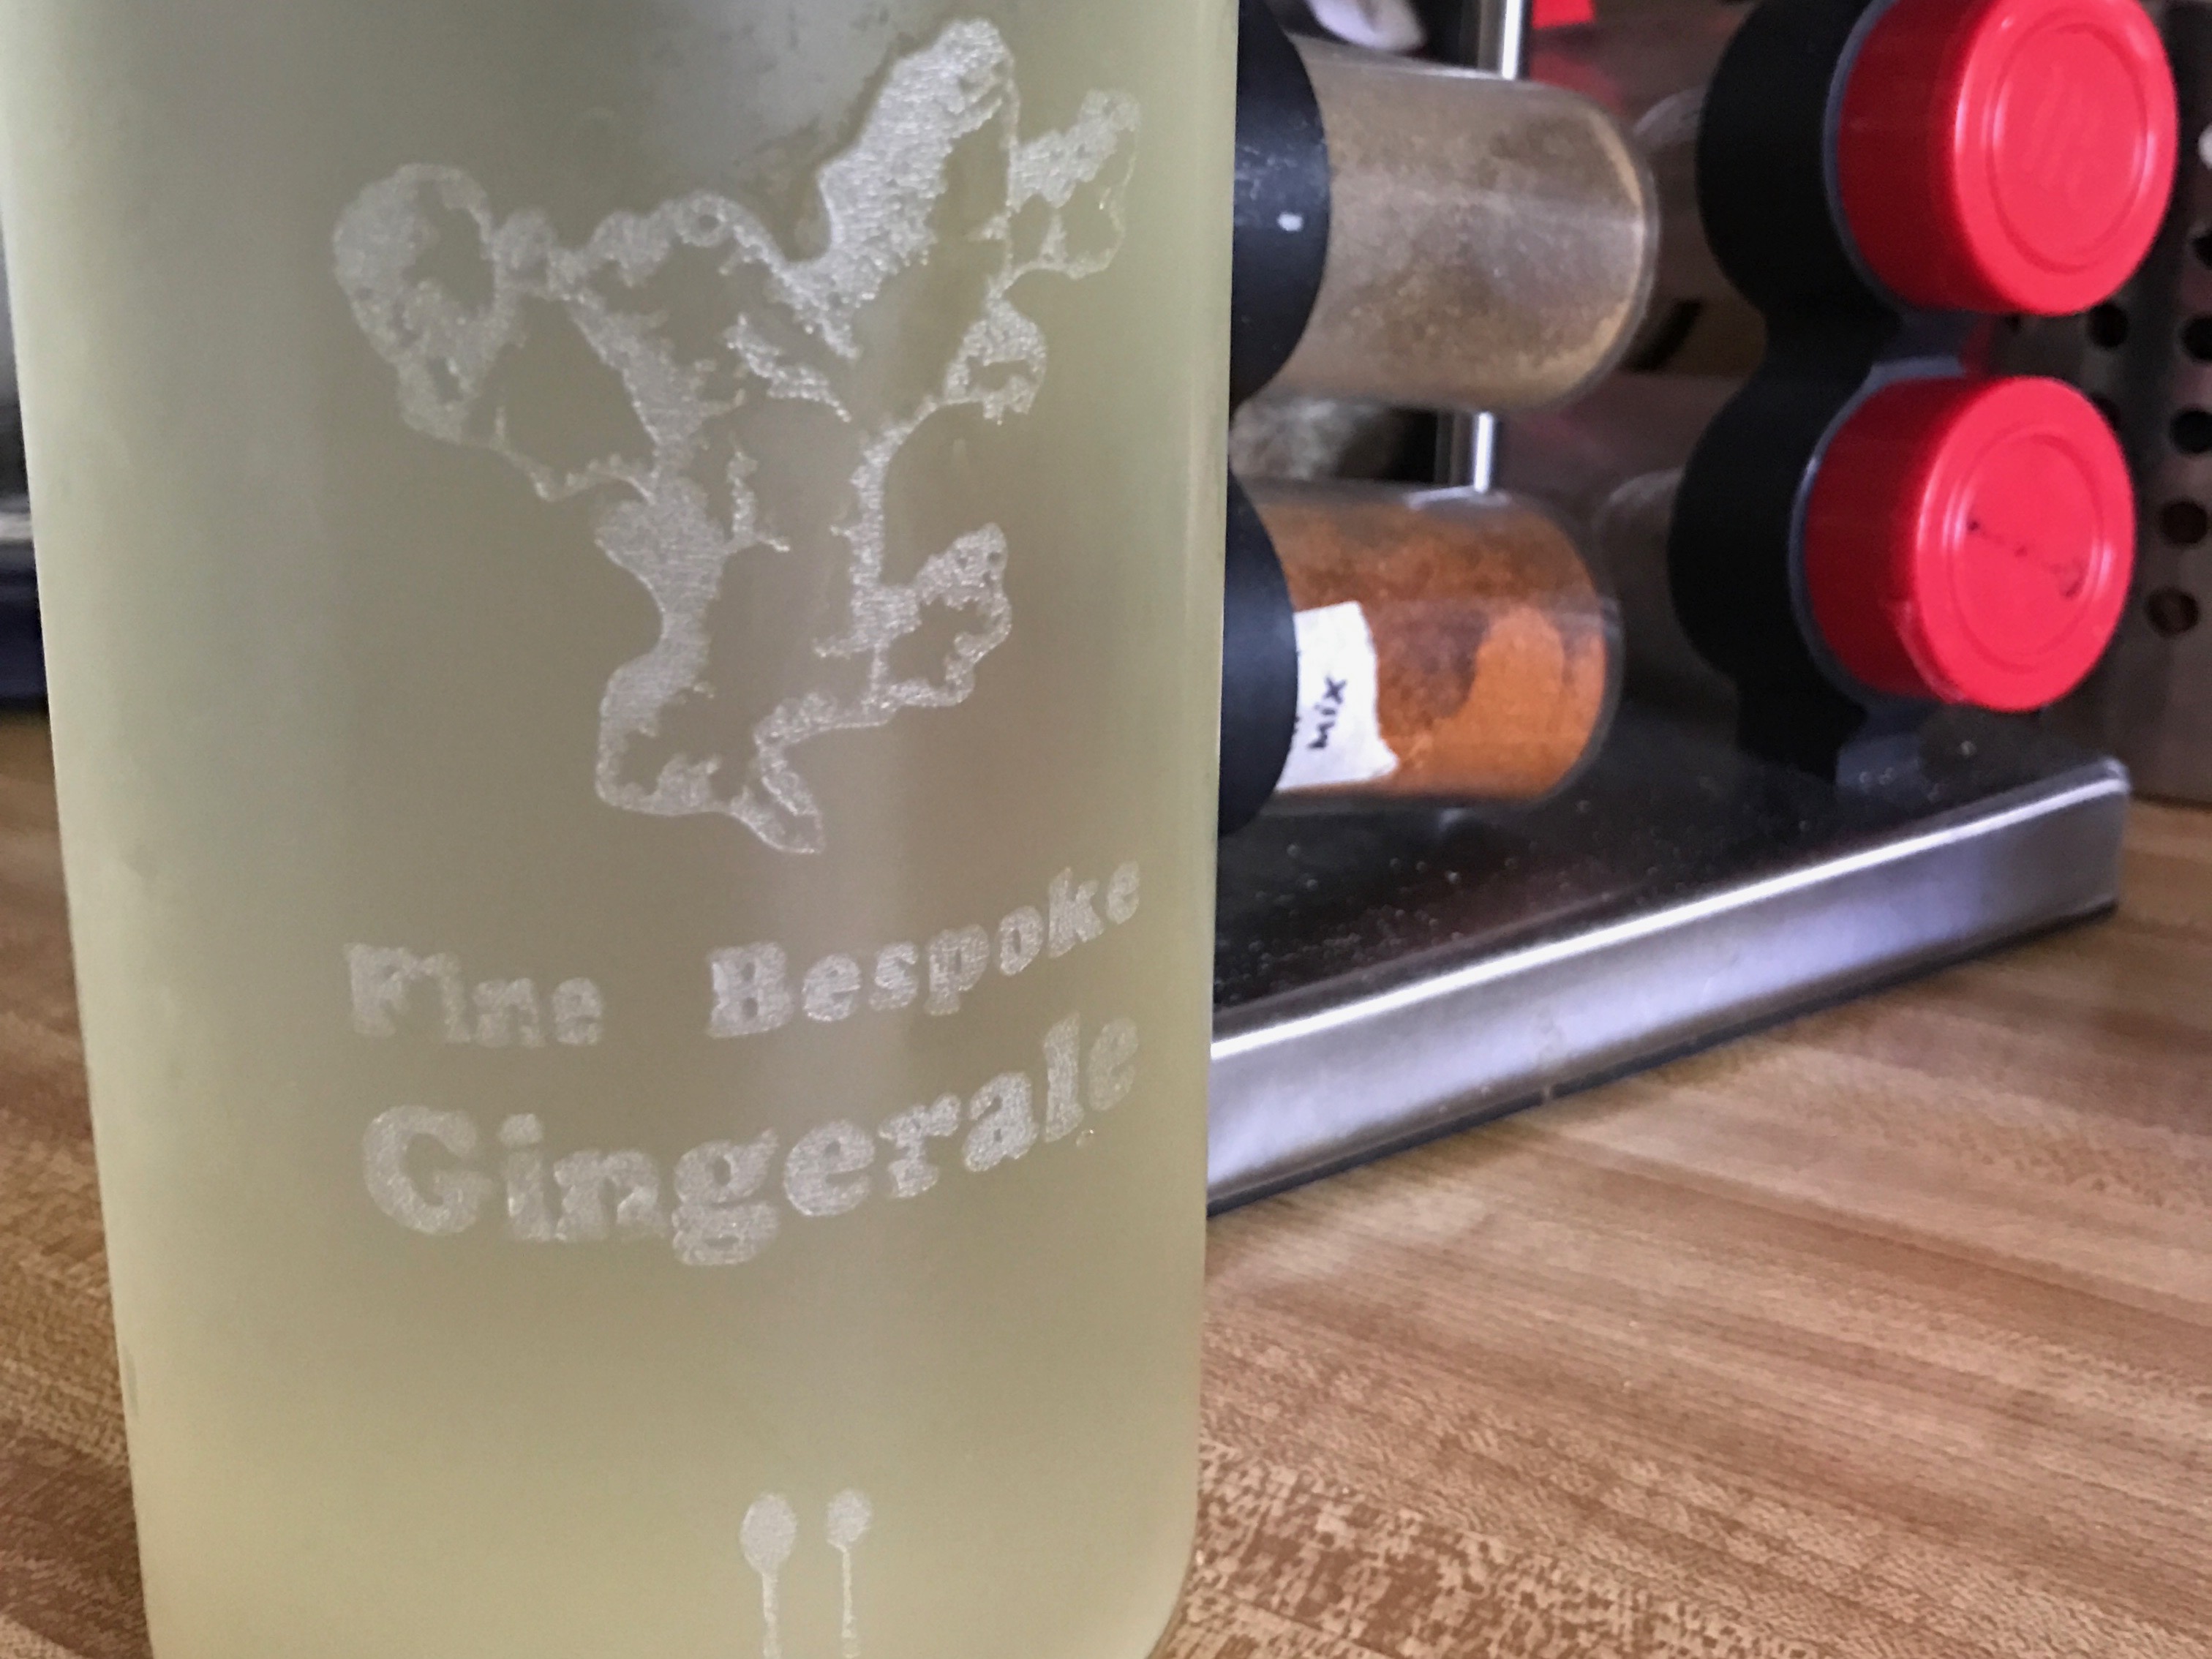 A full bottle laser-etched with a ginger plant and the words "Fine Bespoke Gingerale".